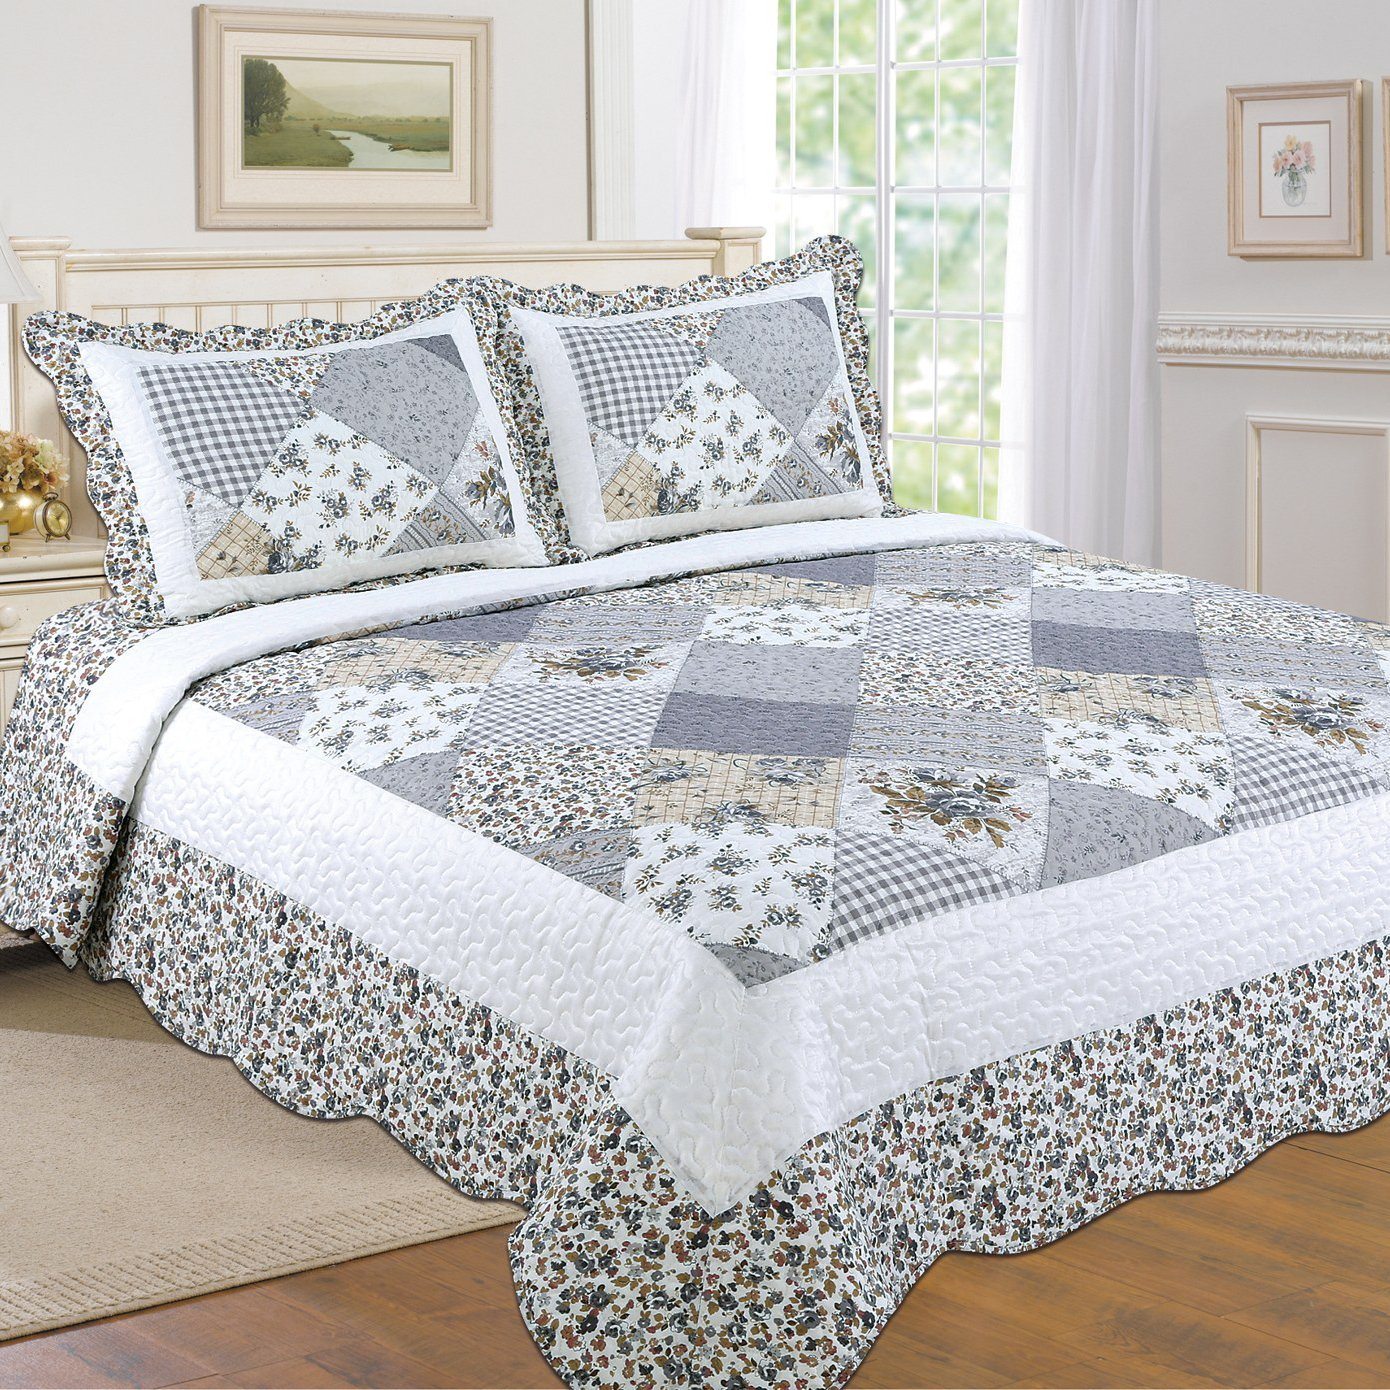 Tradition Premium Printed Reversible Quilt Sets / Gray / Full/Queen